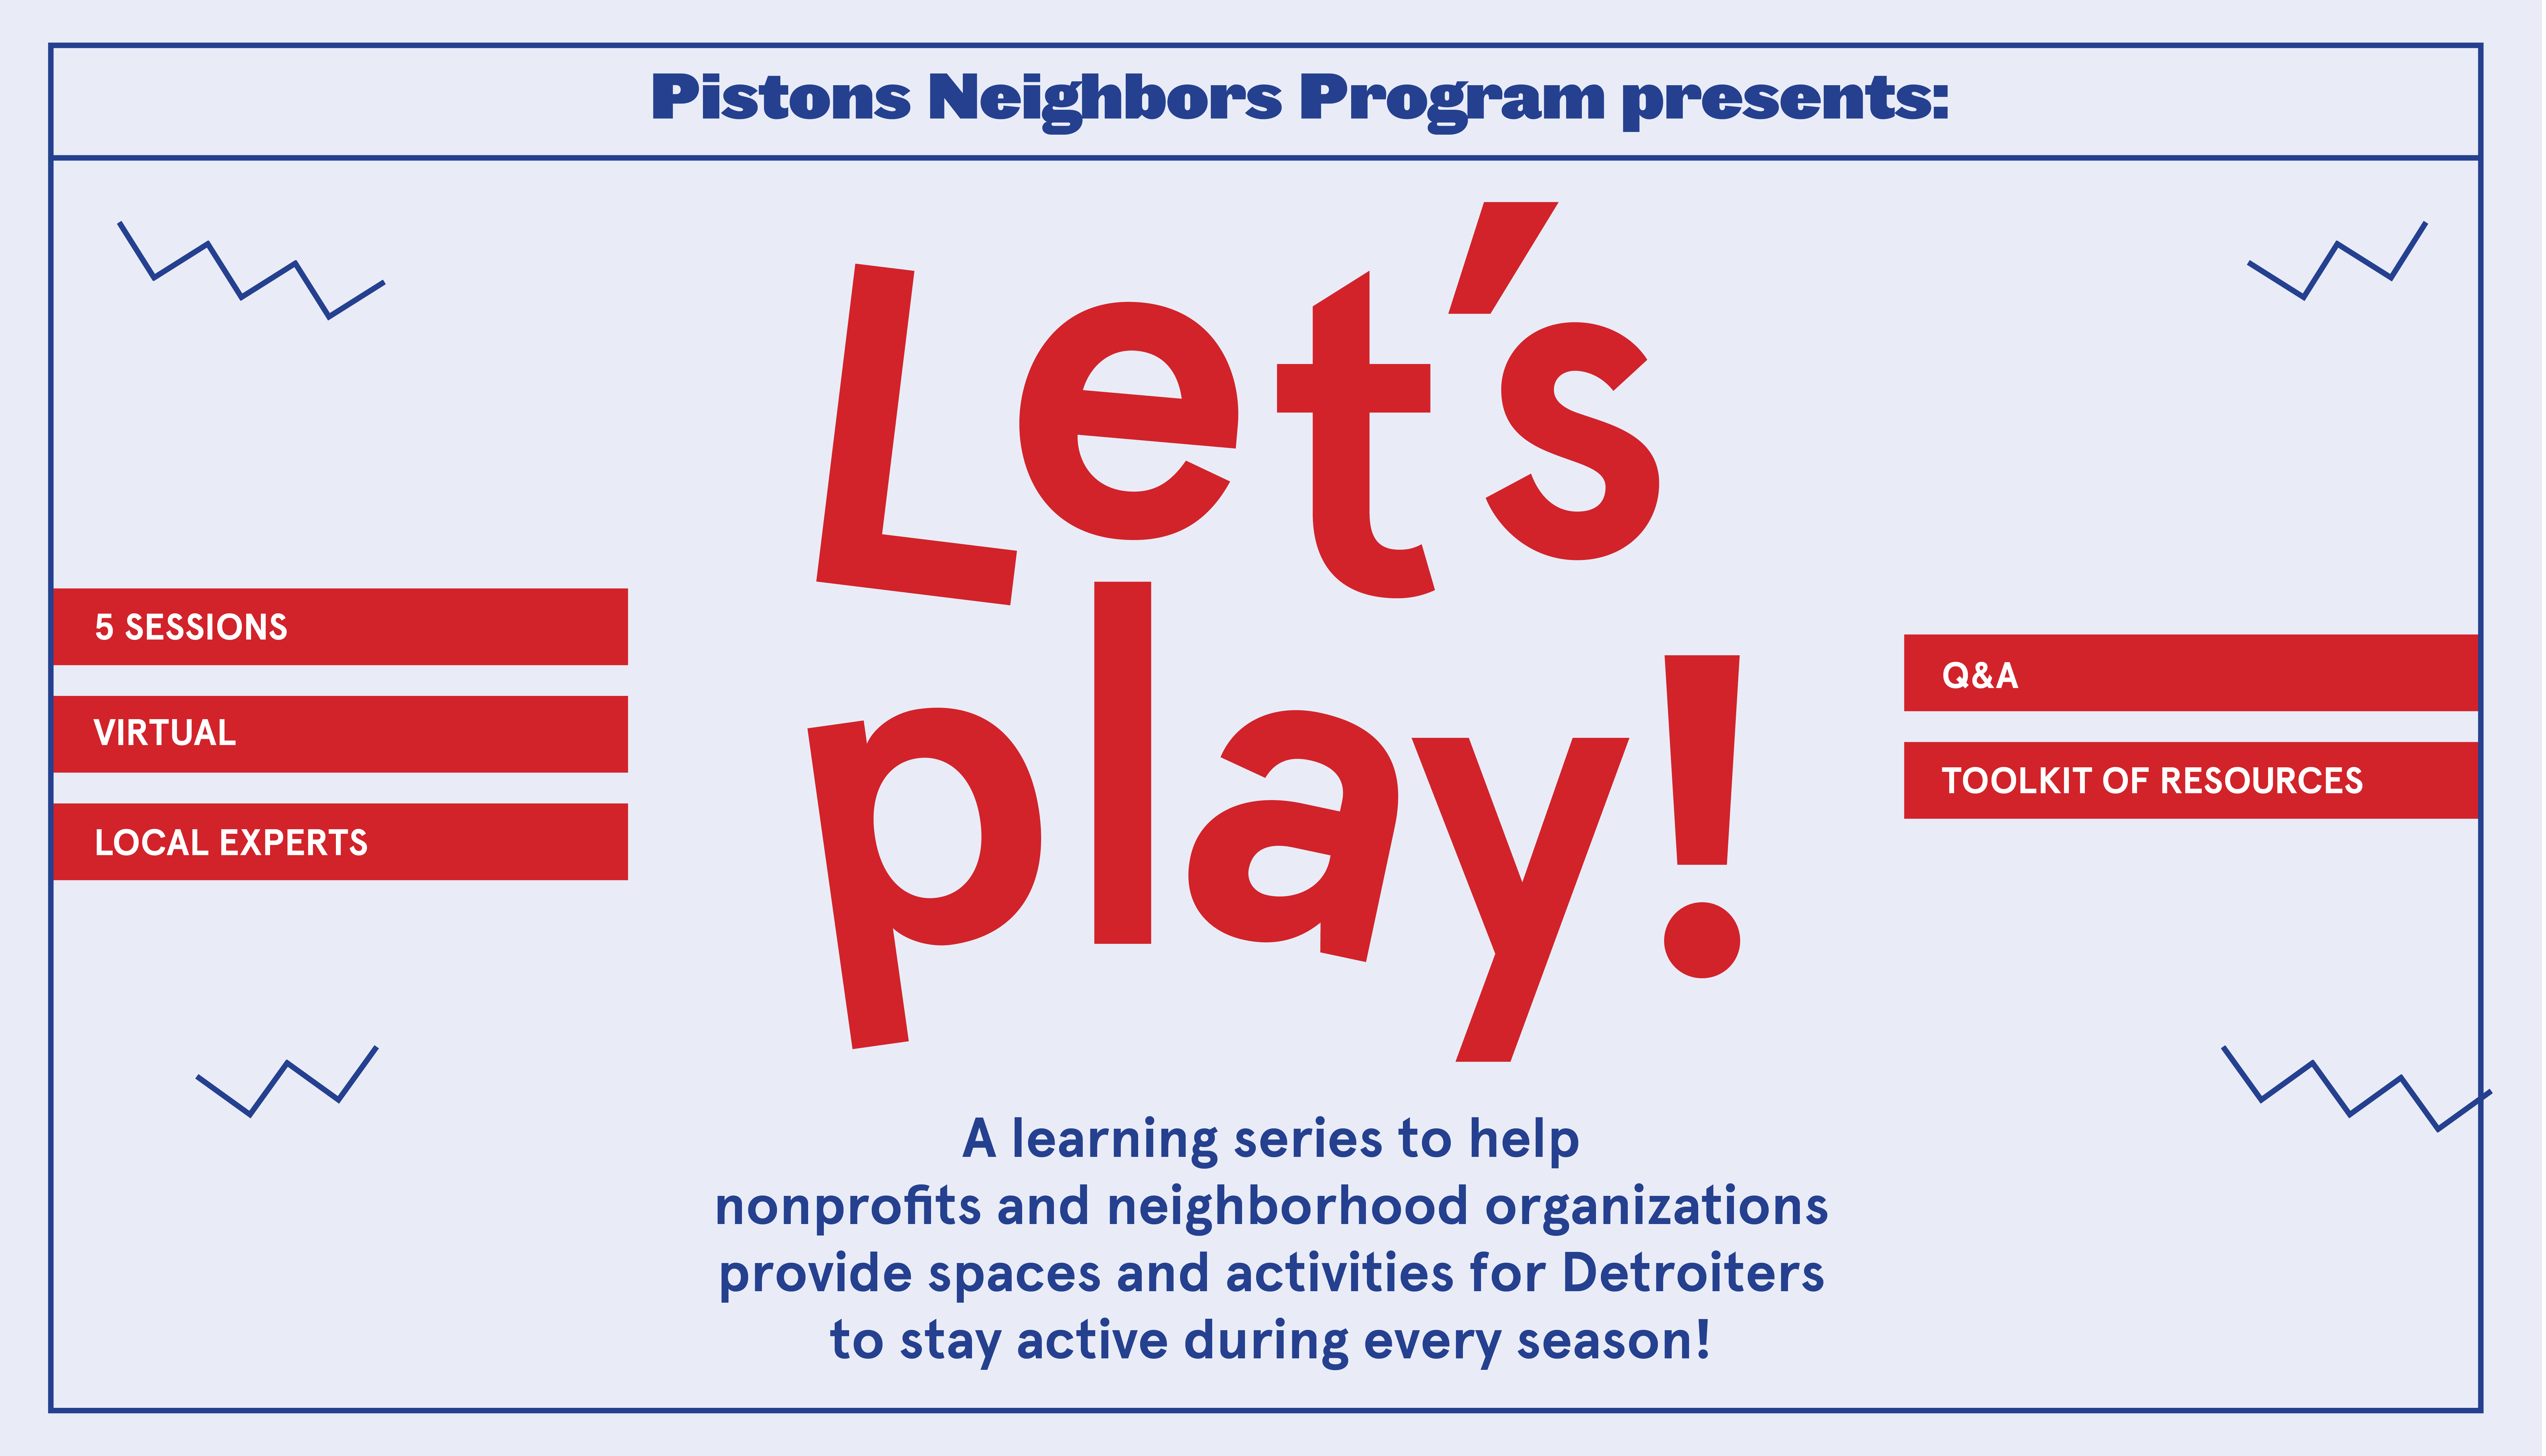 Pistons Heighbors Program presents: Let's Play! A learning series to help nonprofits and neighborhood organizations provide spaces and activities for Detroiters to stay active during every season!